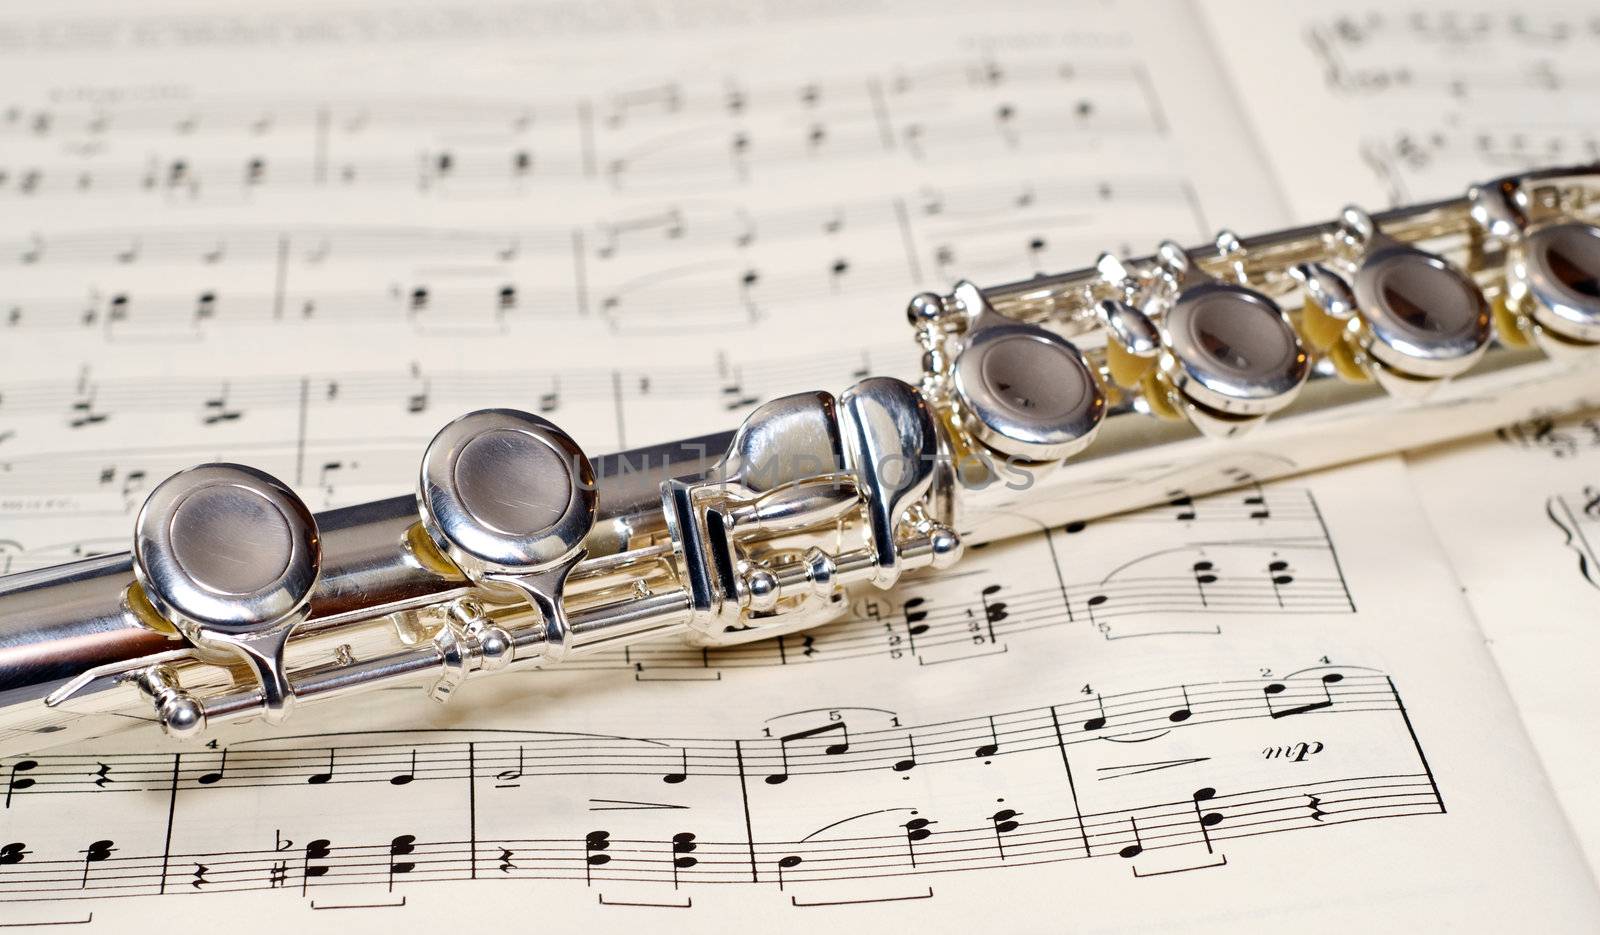 Closeup view of the keys of a metal flute, shot on a music sheet